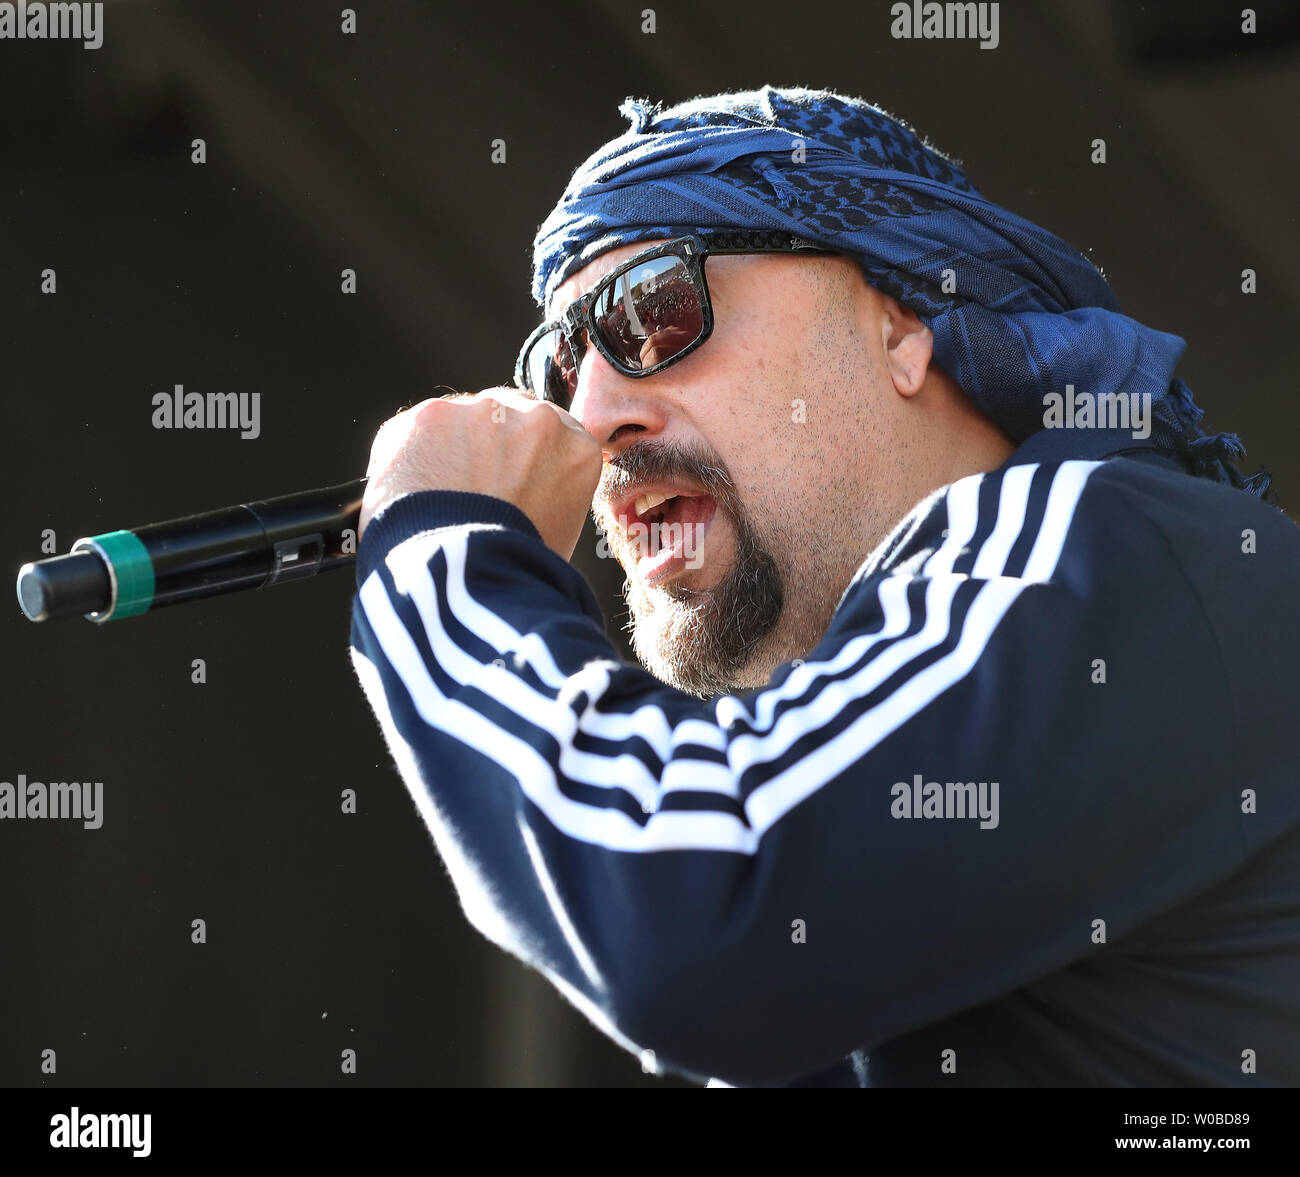 Louis "B-Real" Freese, of the Latino-American hip hop band Cypress Hill  performs during the controversial 25th annual 4/20 protest at Sunset Beach  in Vancouver, British Columbia on April 20, 2019. Around 100,000